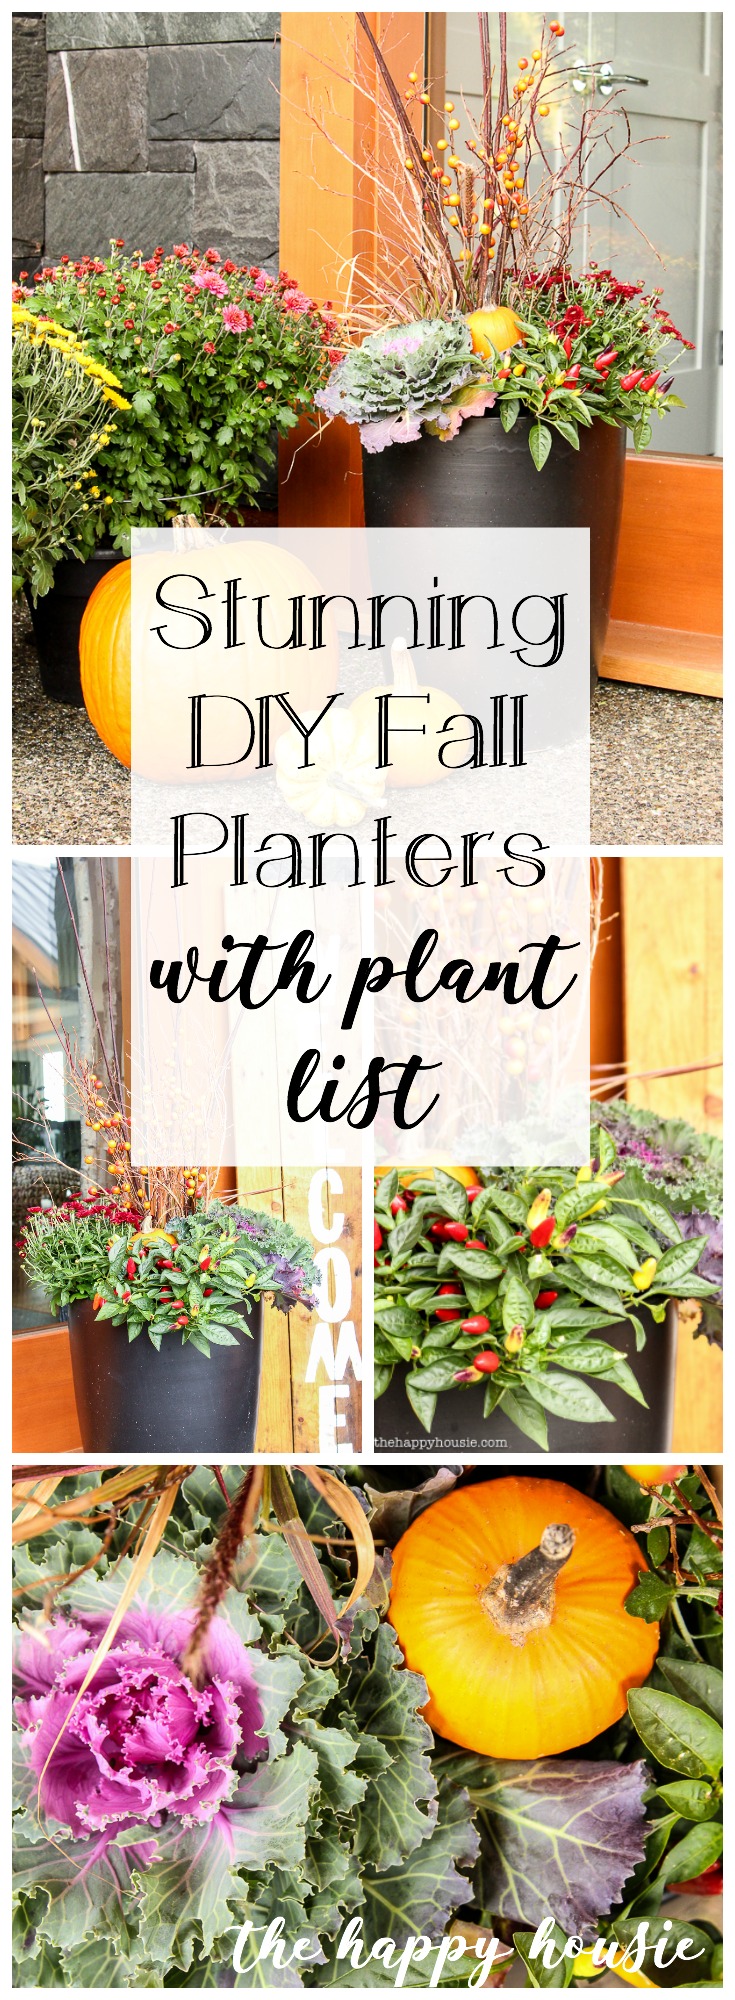 Stunning DIY Fall Planters with plant list graphic.